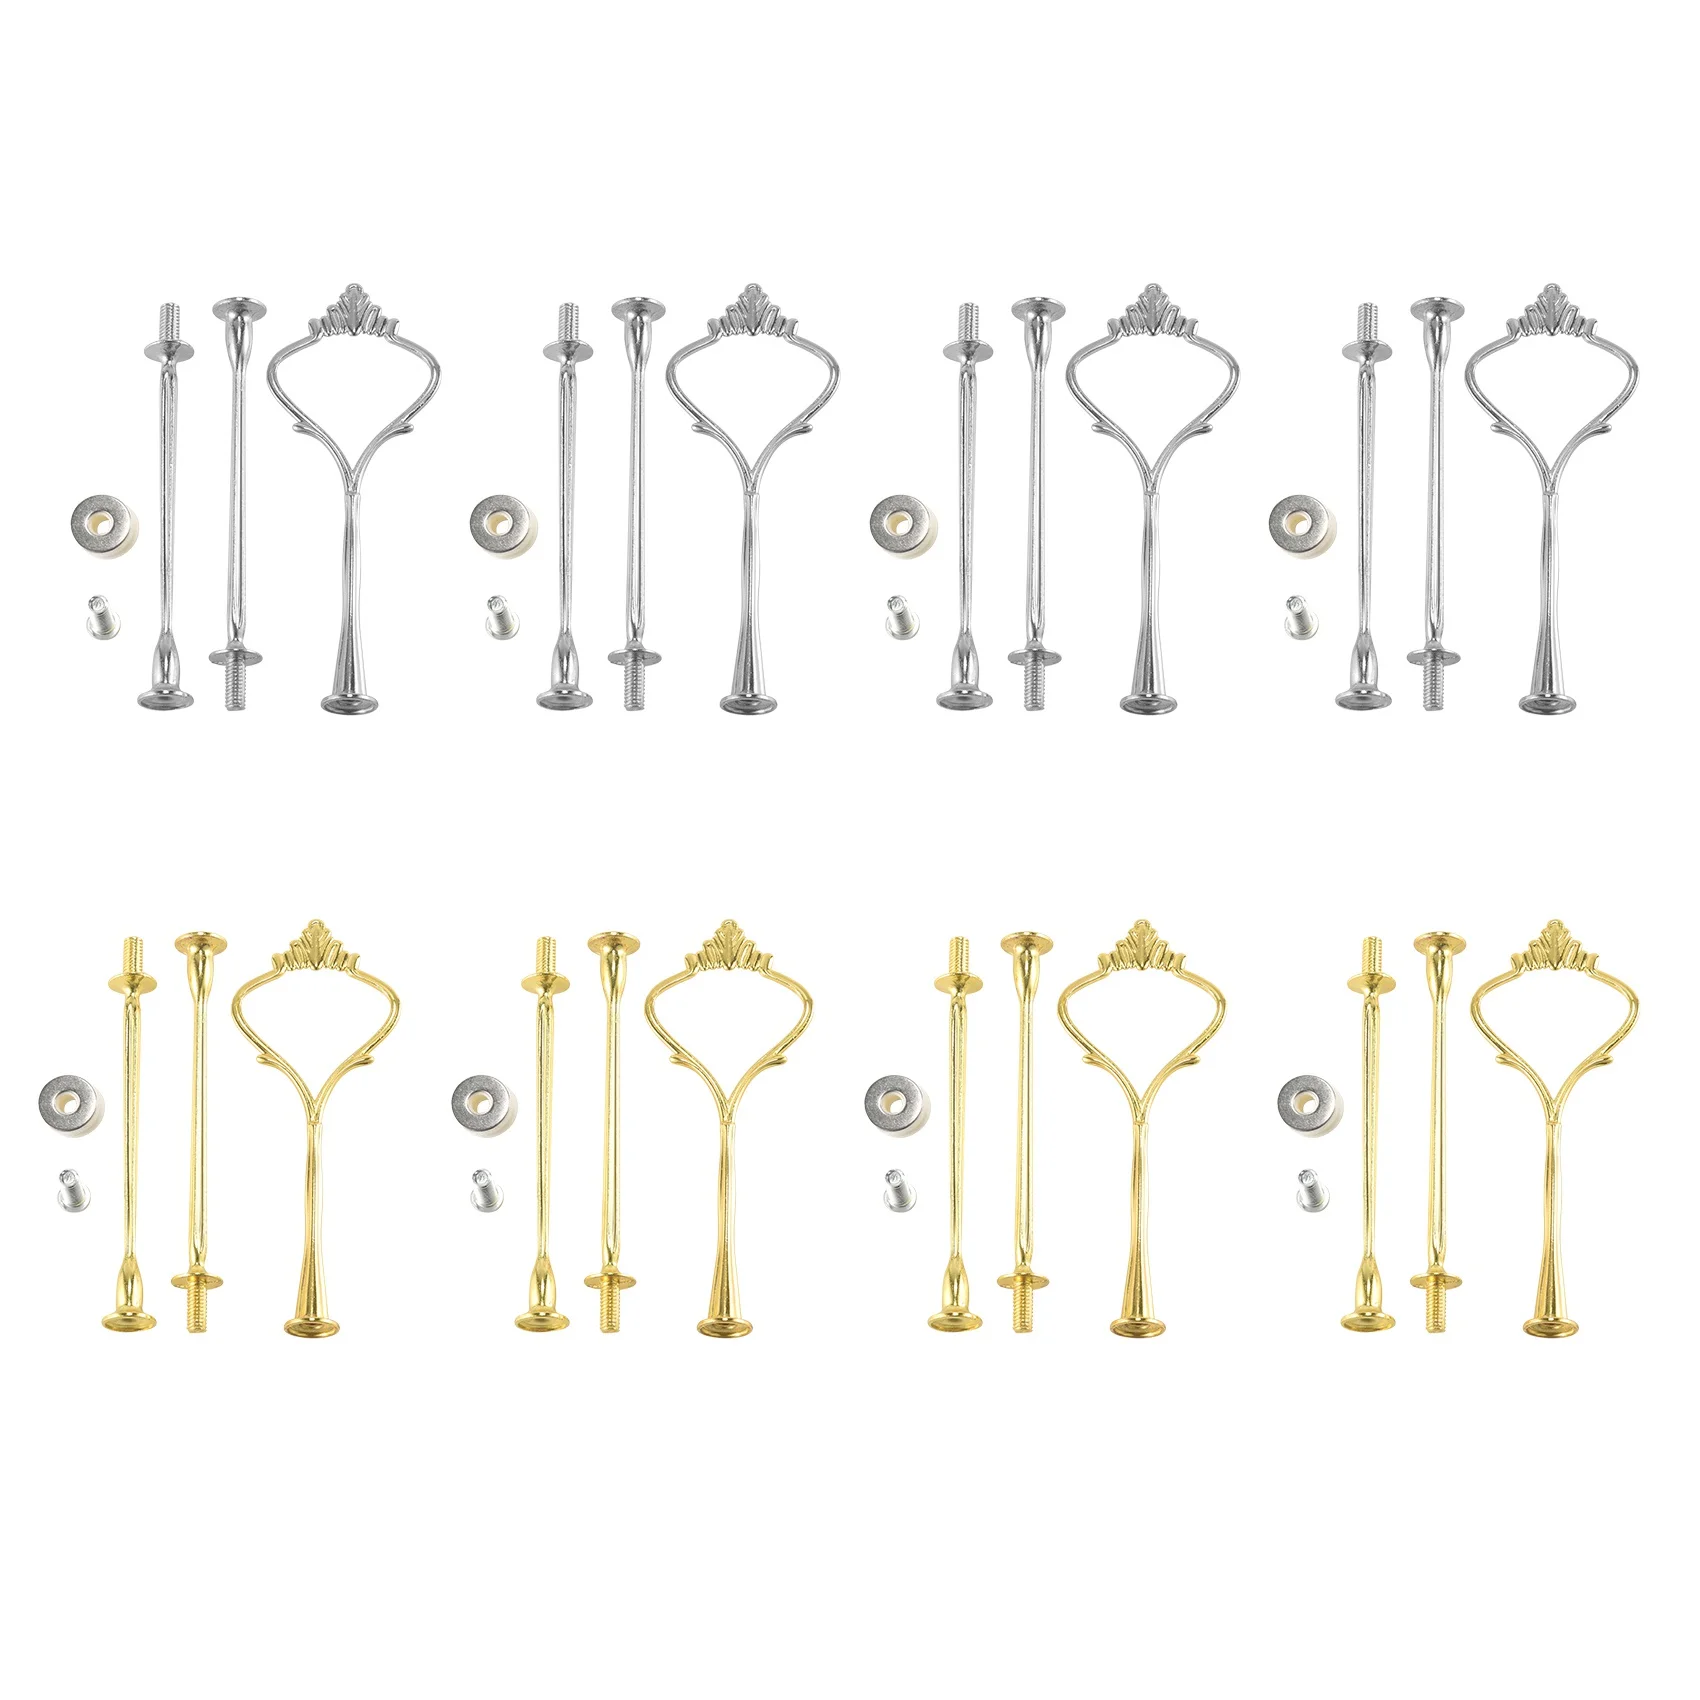 

8 Sets 3 Tier Crown Cake Plate Stand Fittings Hardware Holder Kitchen Gadgets for Wedding and Party - Silver&Golden